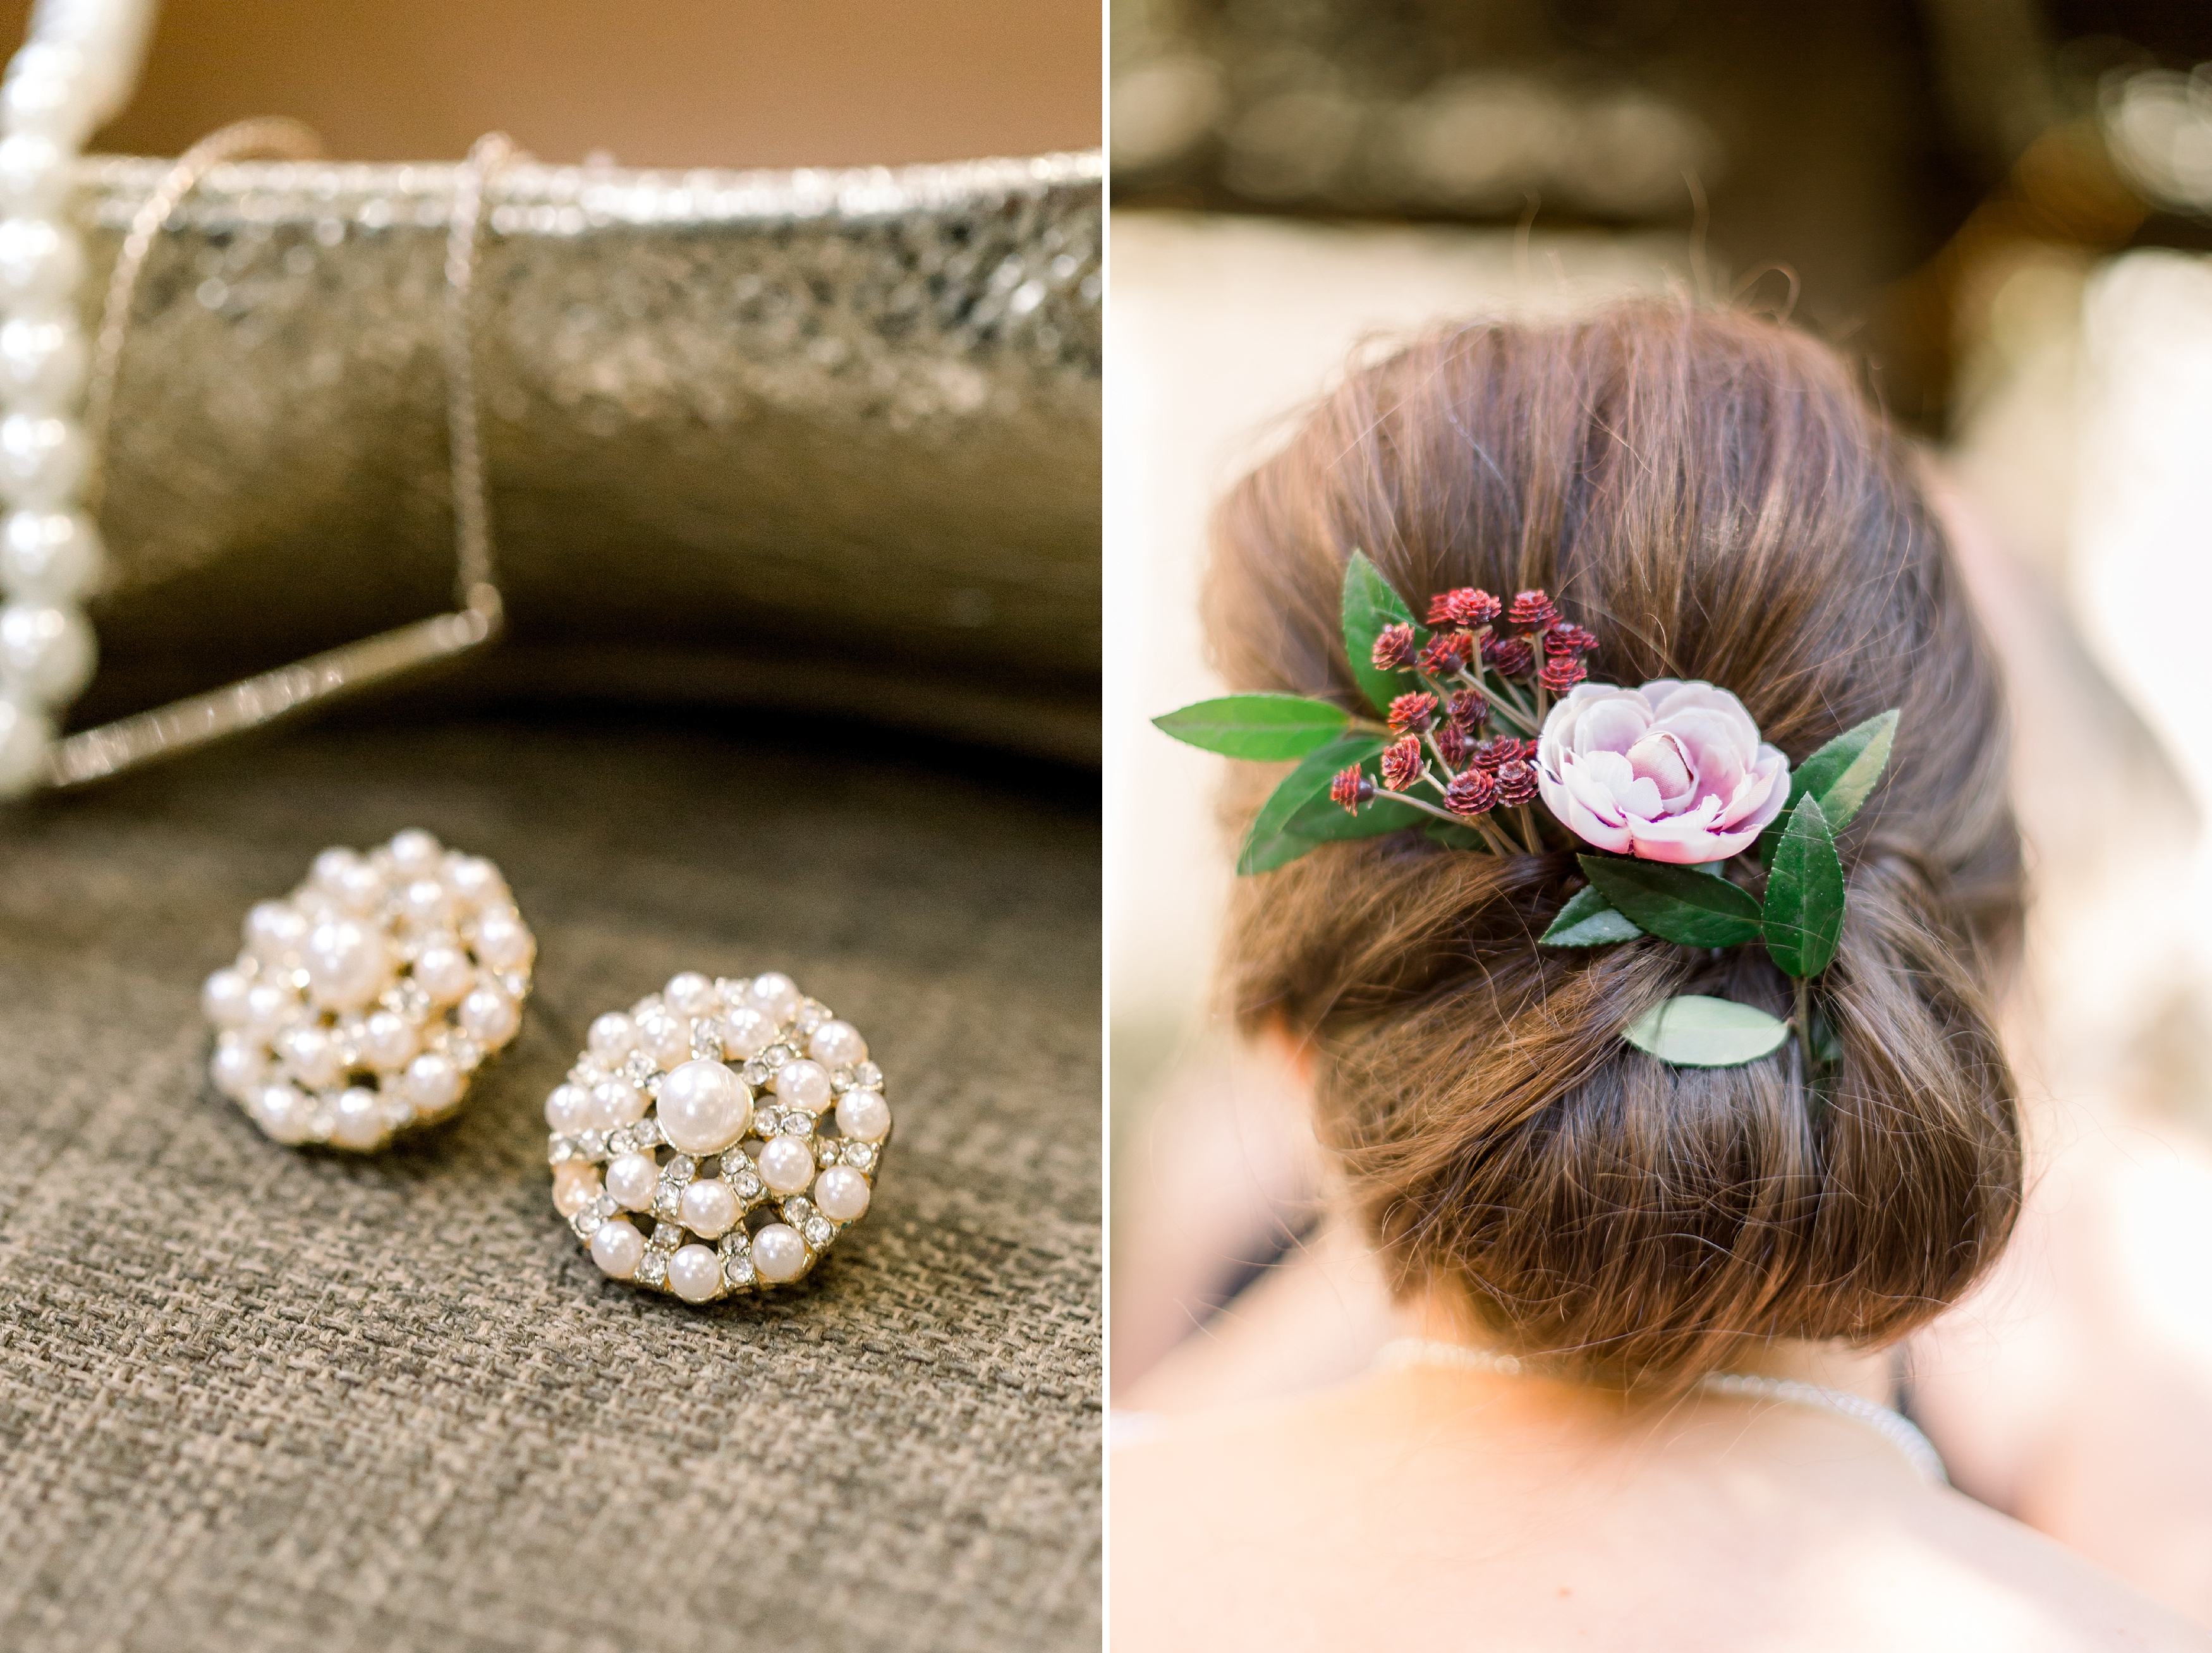 Wedding day jewelry; bride's hair in bun with flowers.